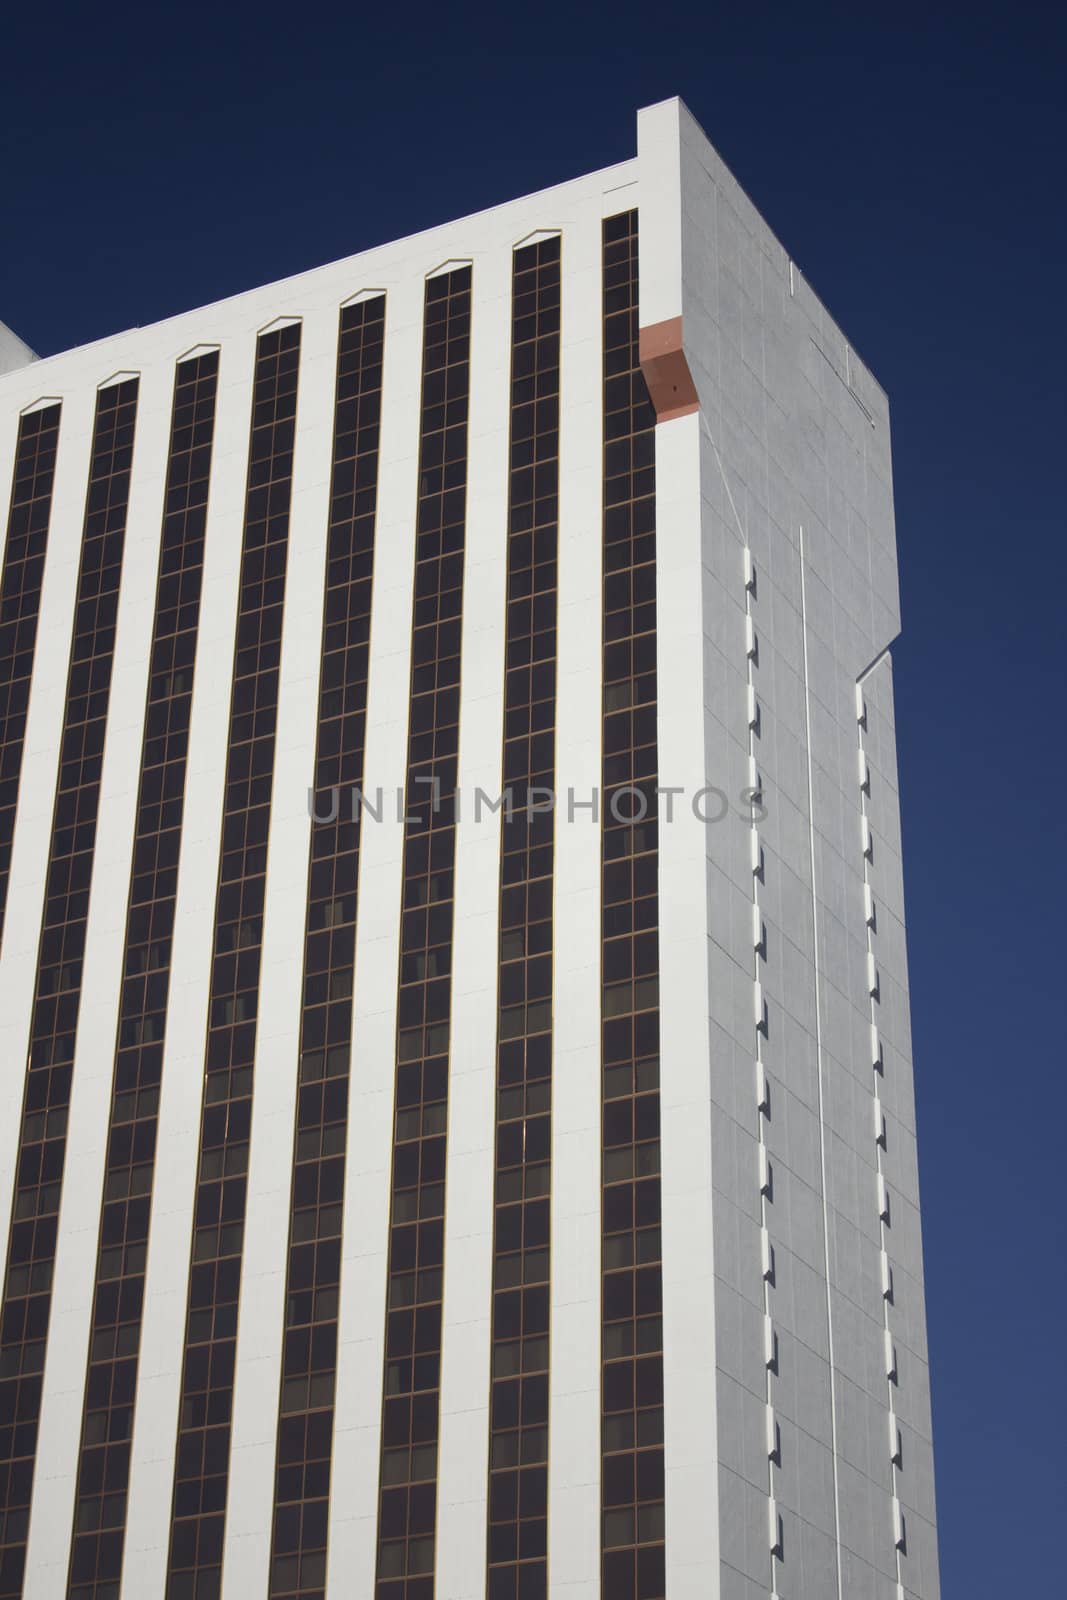 Casino building with blue skies and gold windows. by jeremywhat